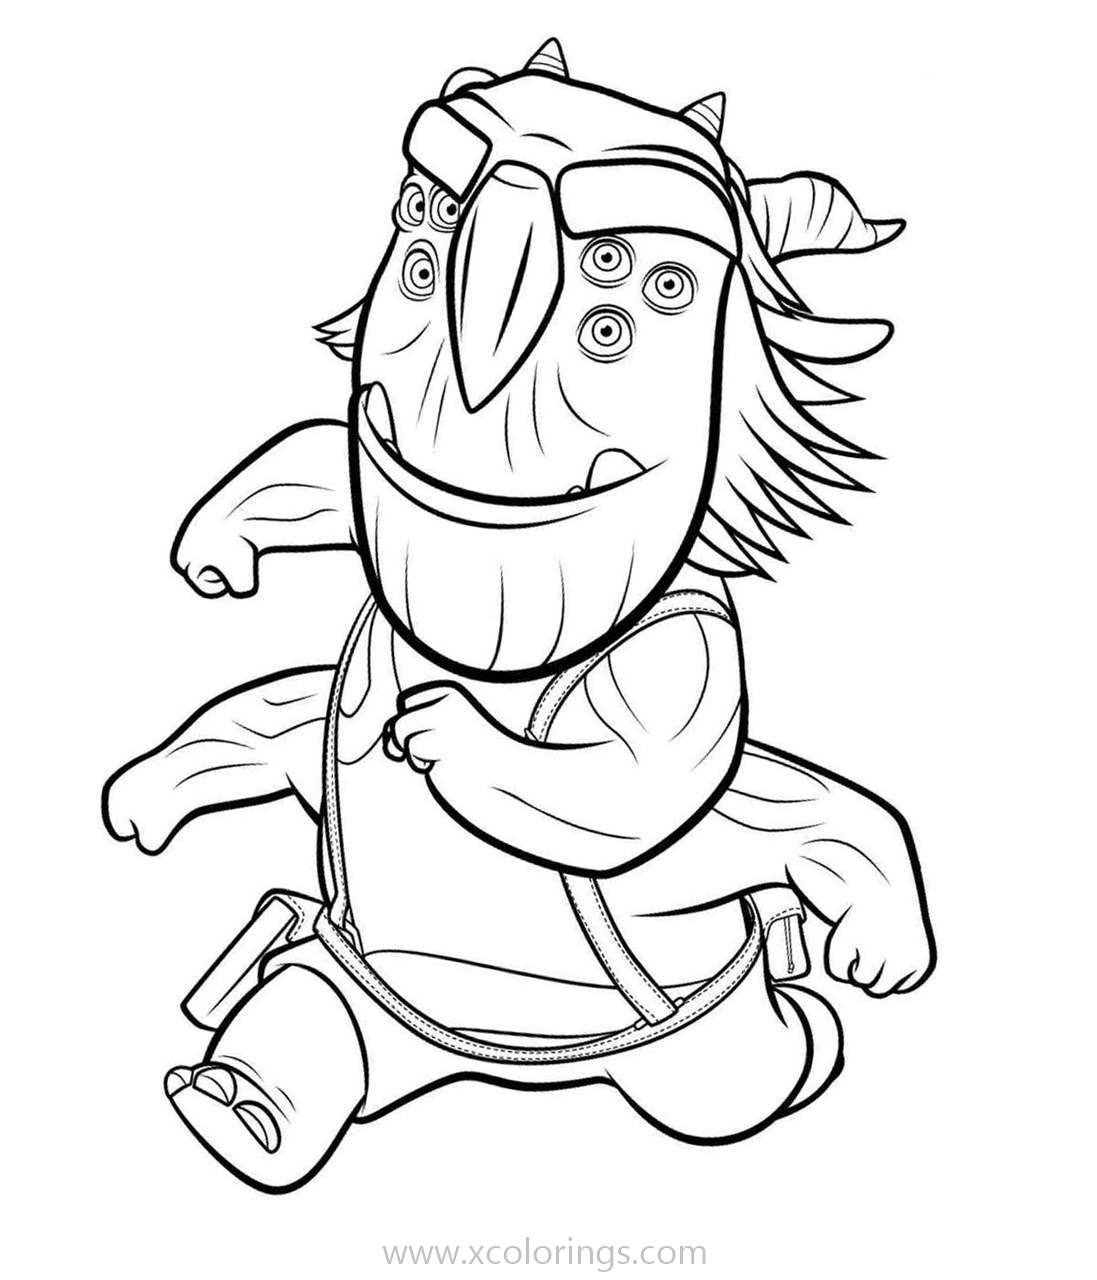 Free Trollhunters Coloring Pages Troll Blinky printable